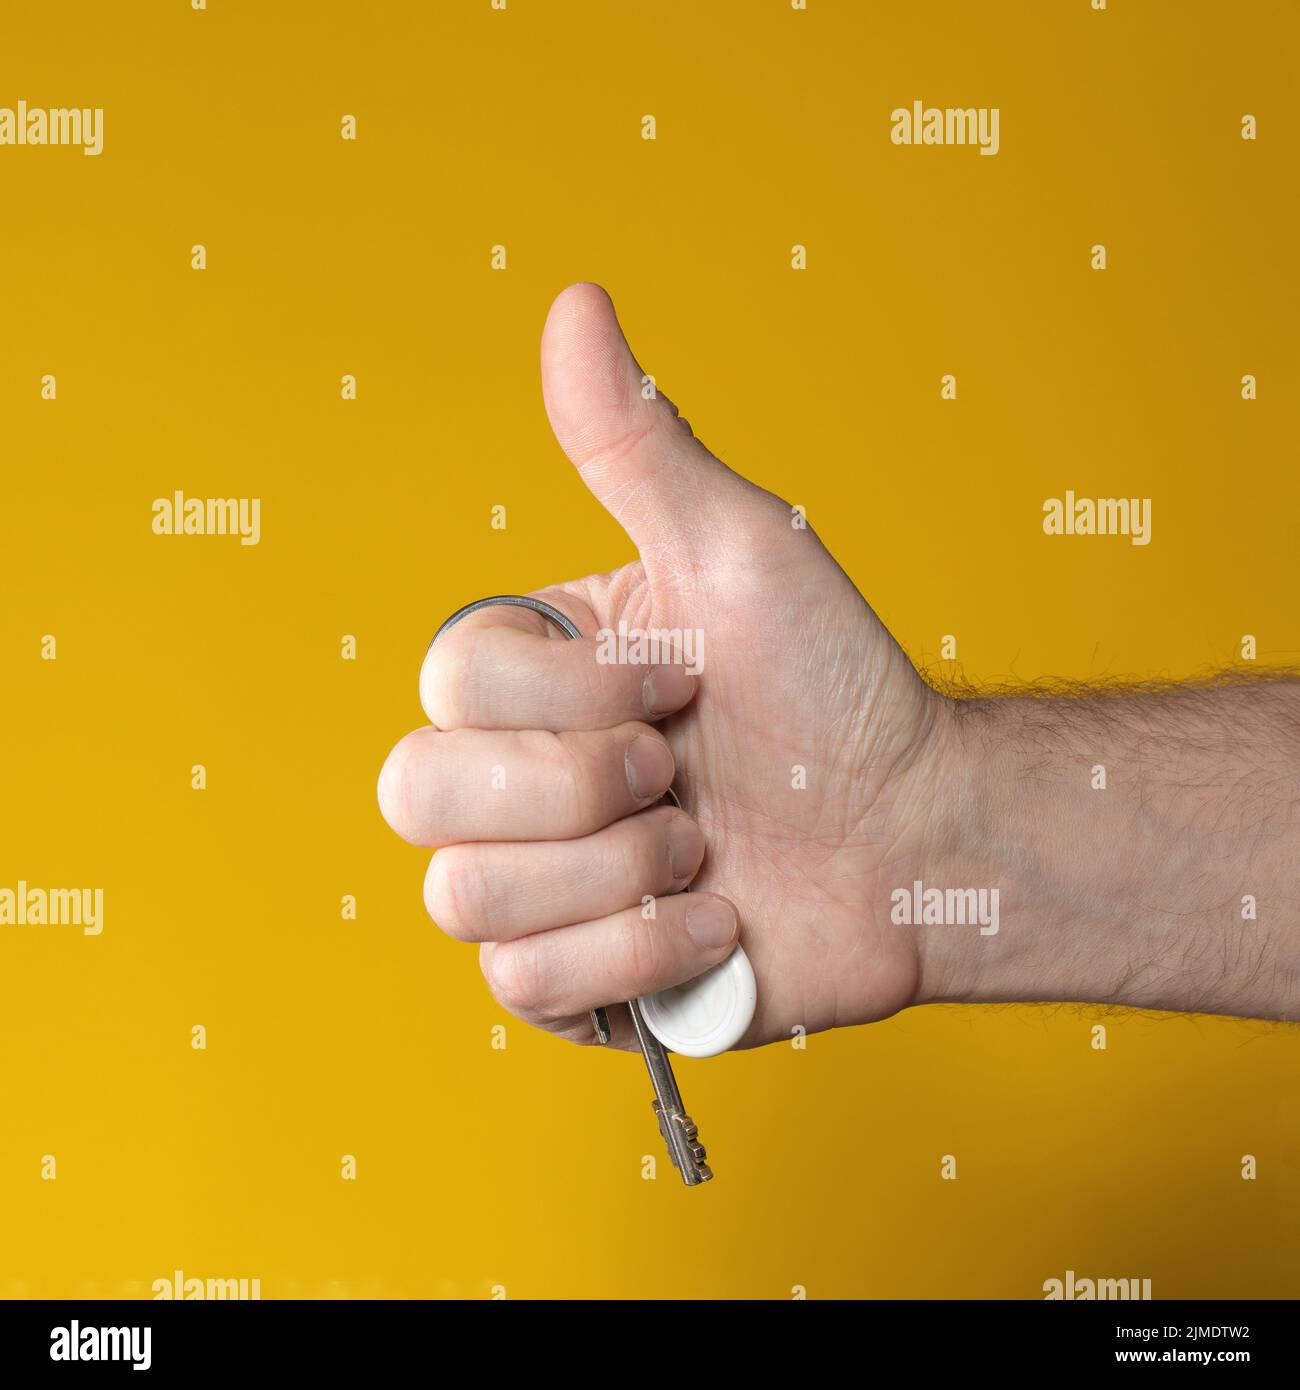 Man hand holding house keys on yellow background. makes thumbs up gesture Stock Photo